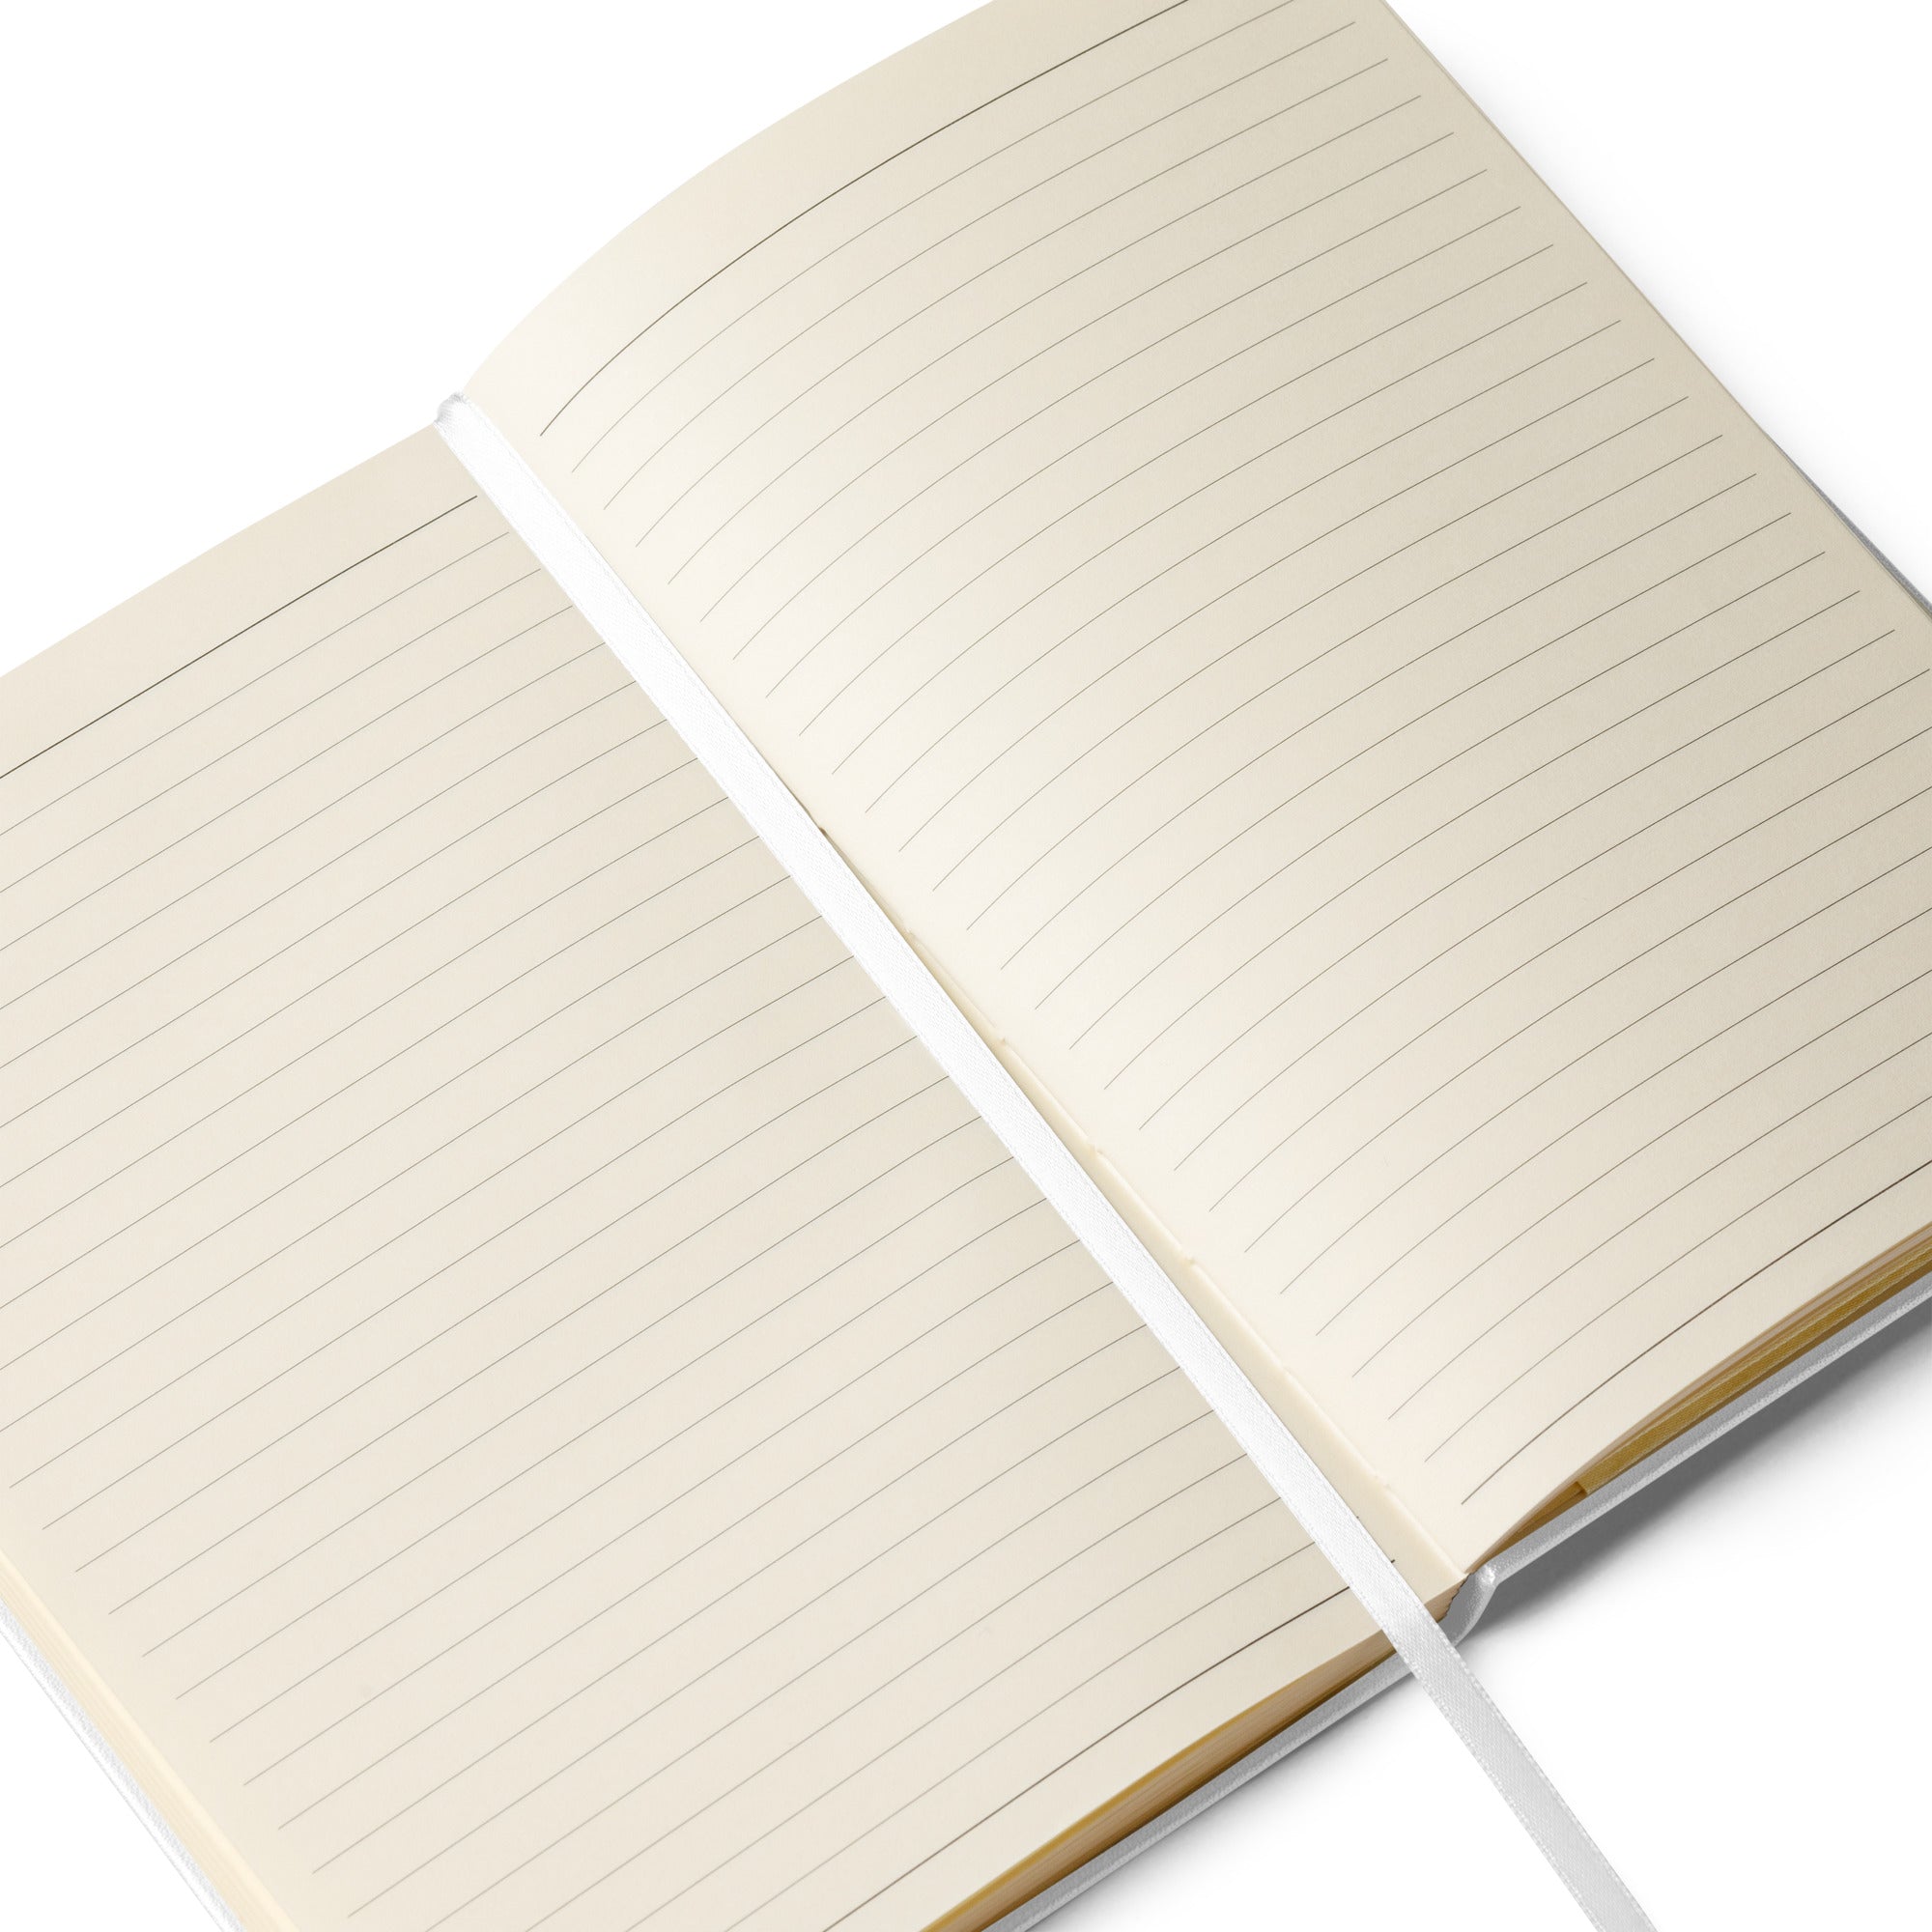 80 lined pages Notebook